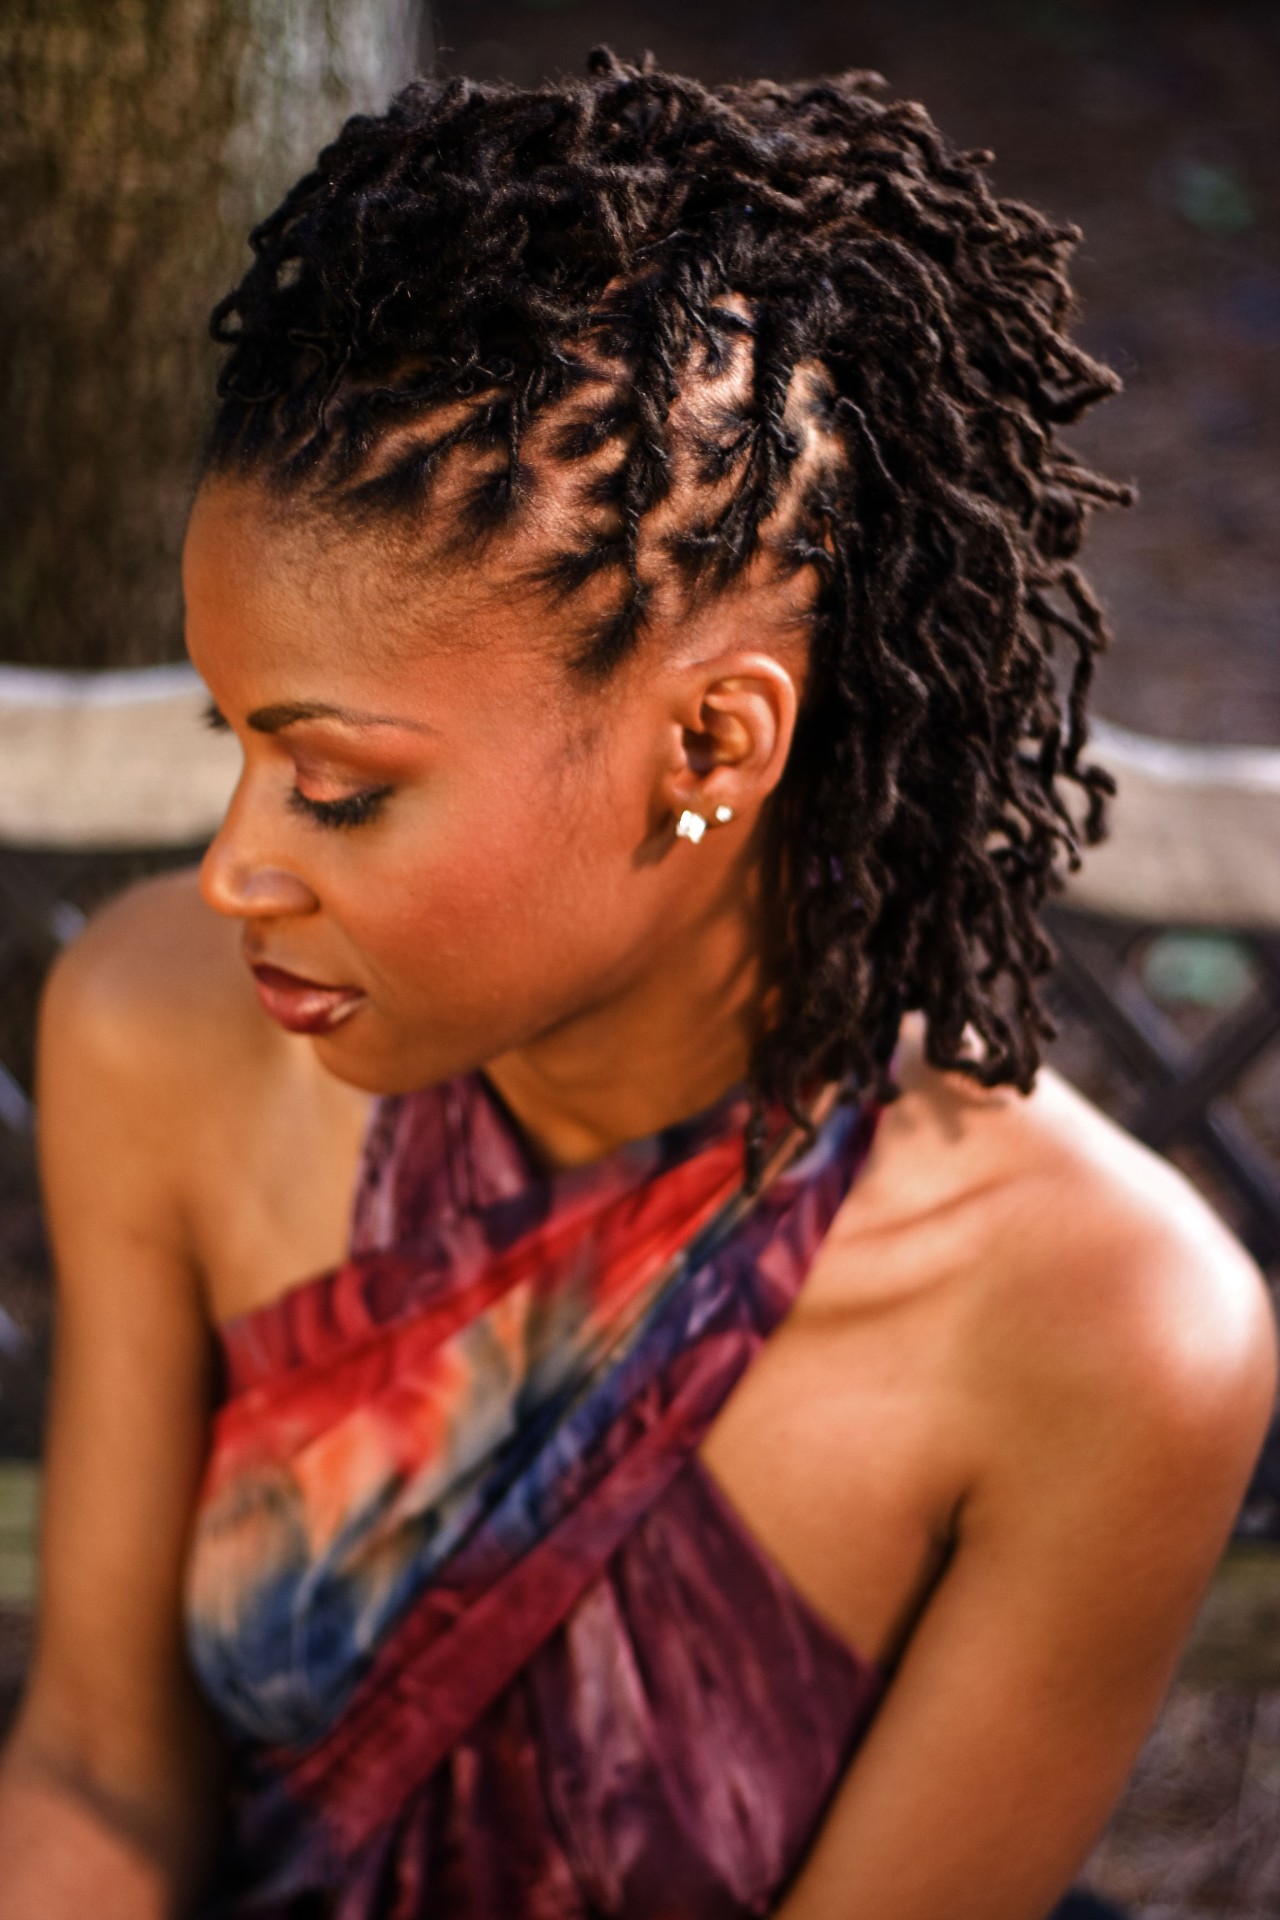 ... dreadlocks pulled back style - thirstyroots.com: Black Hairstyles